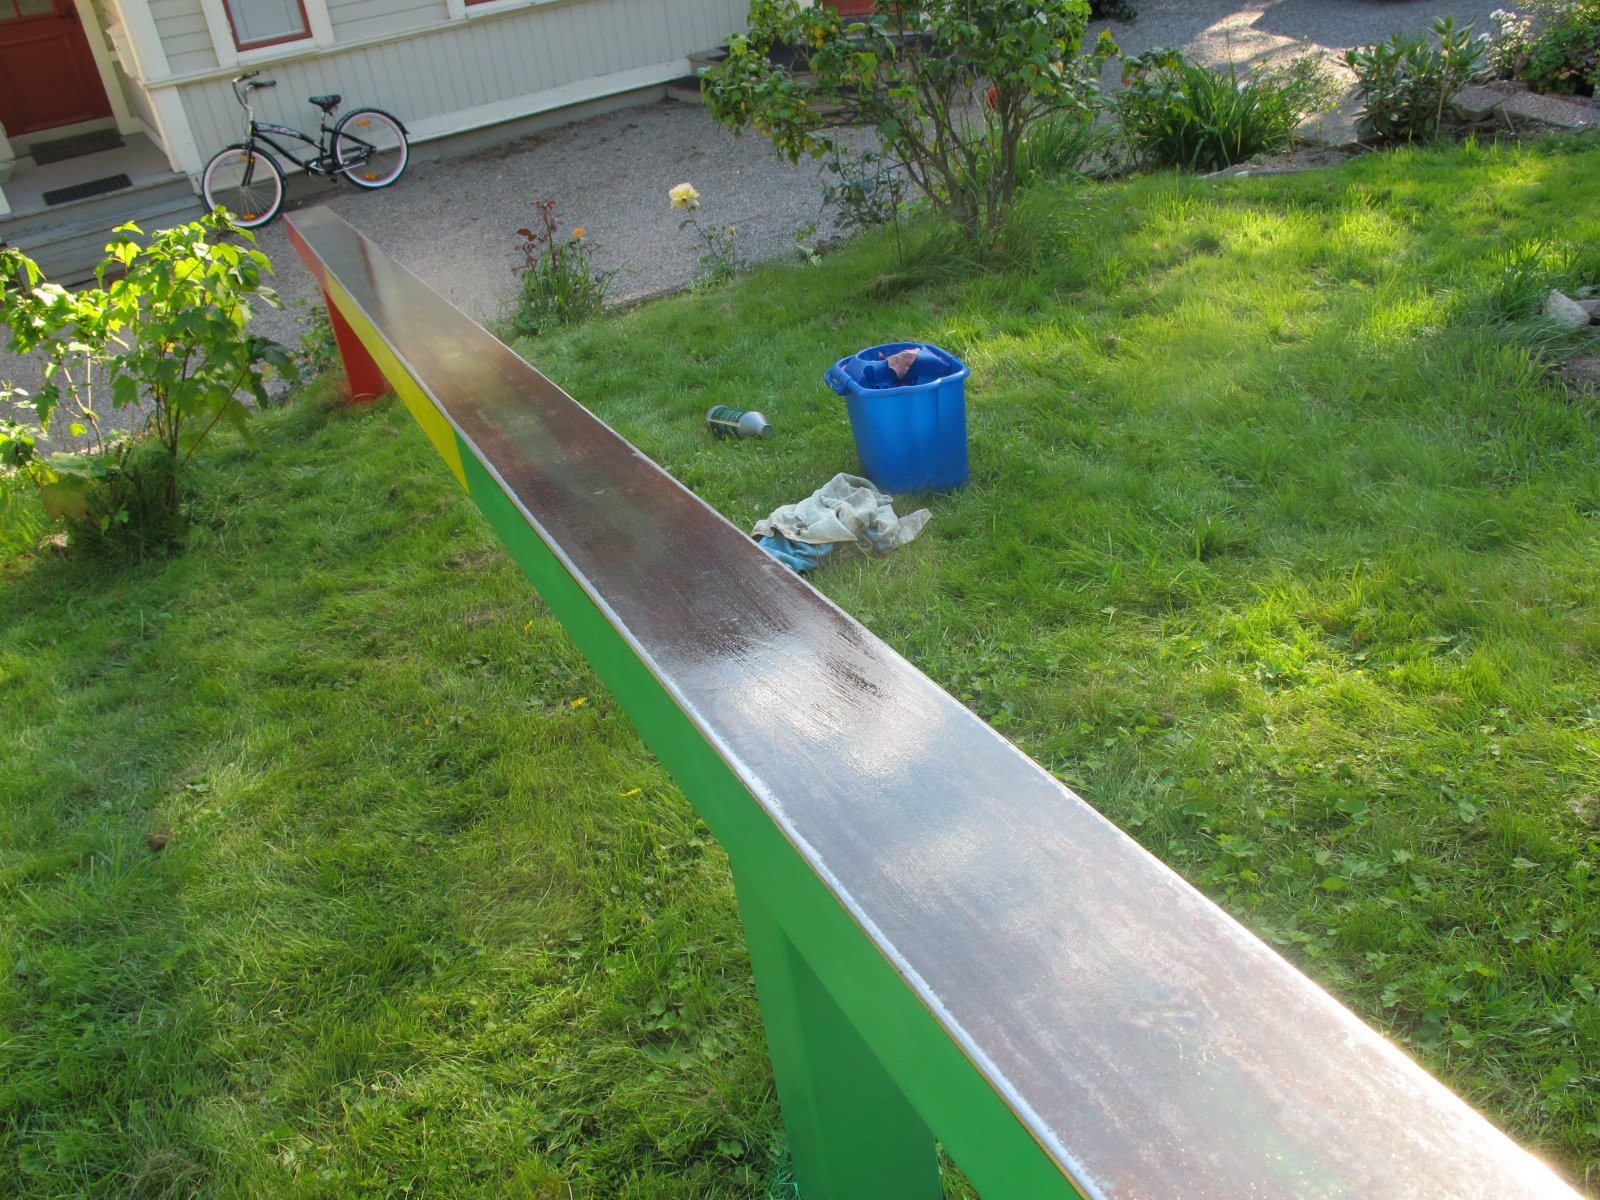 Painting the rail